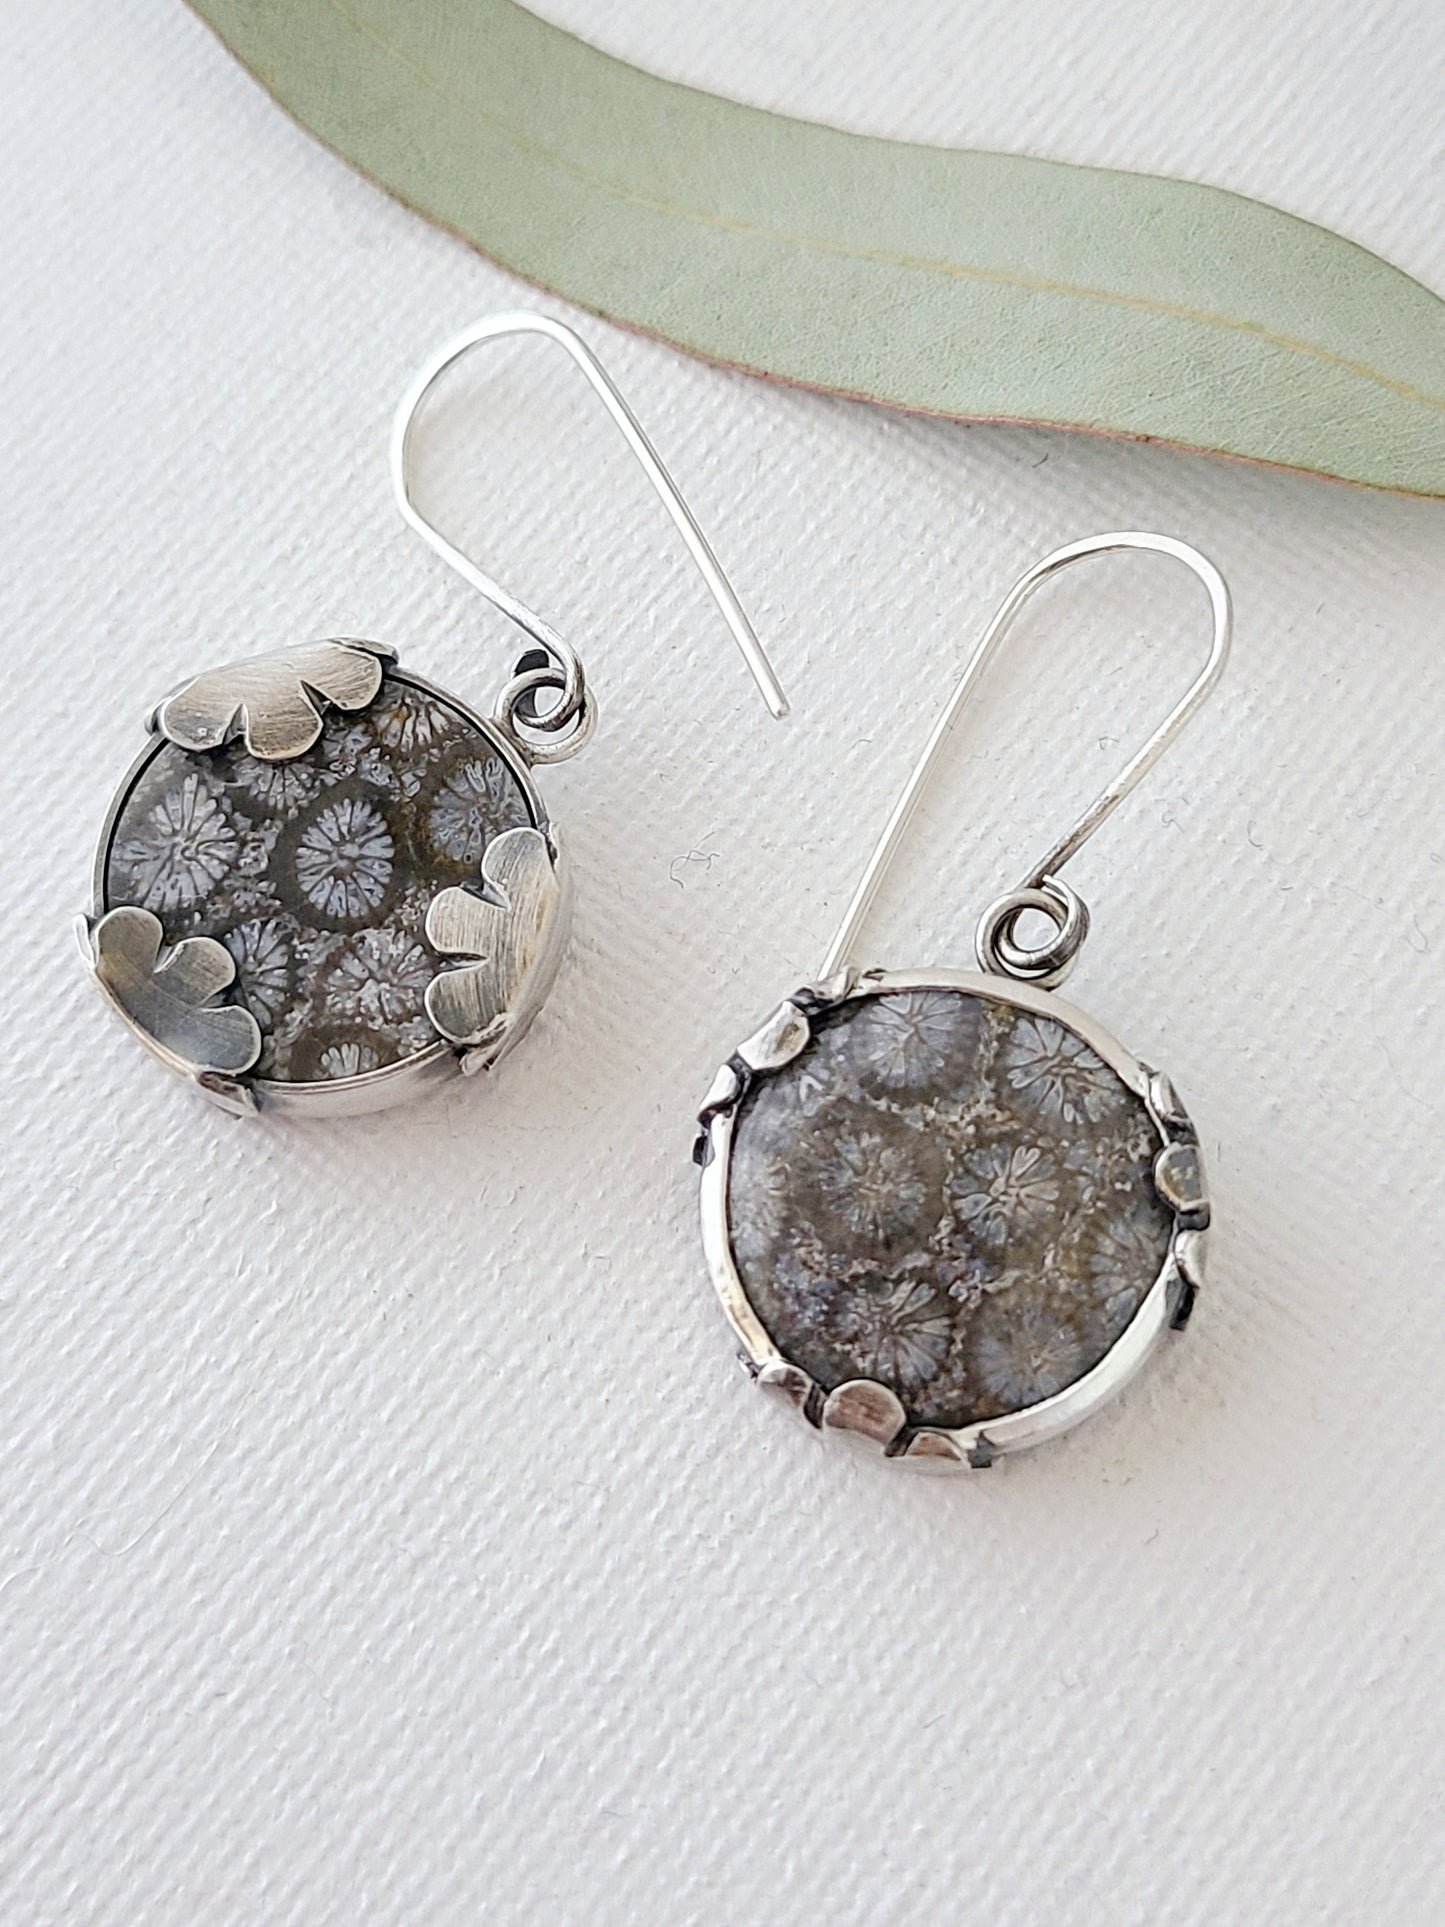 Fossil Flower earrings-Black & Gray Round Fossilized Coral